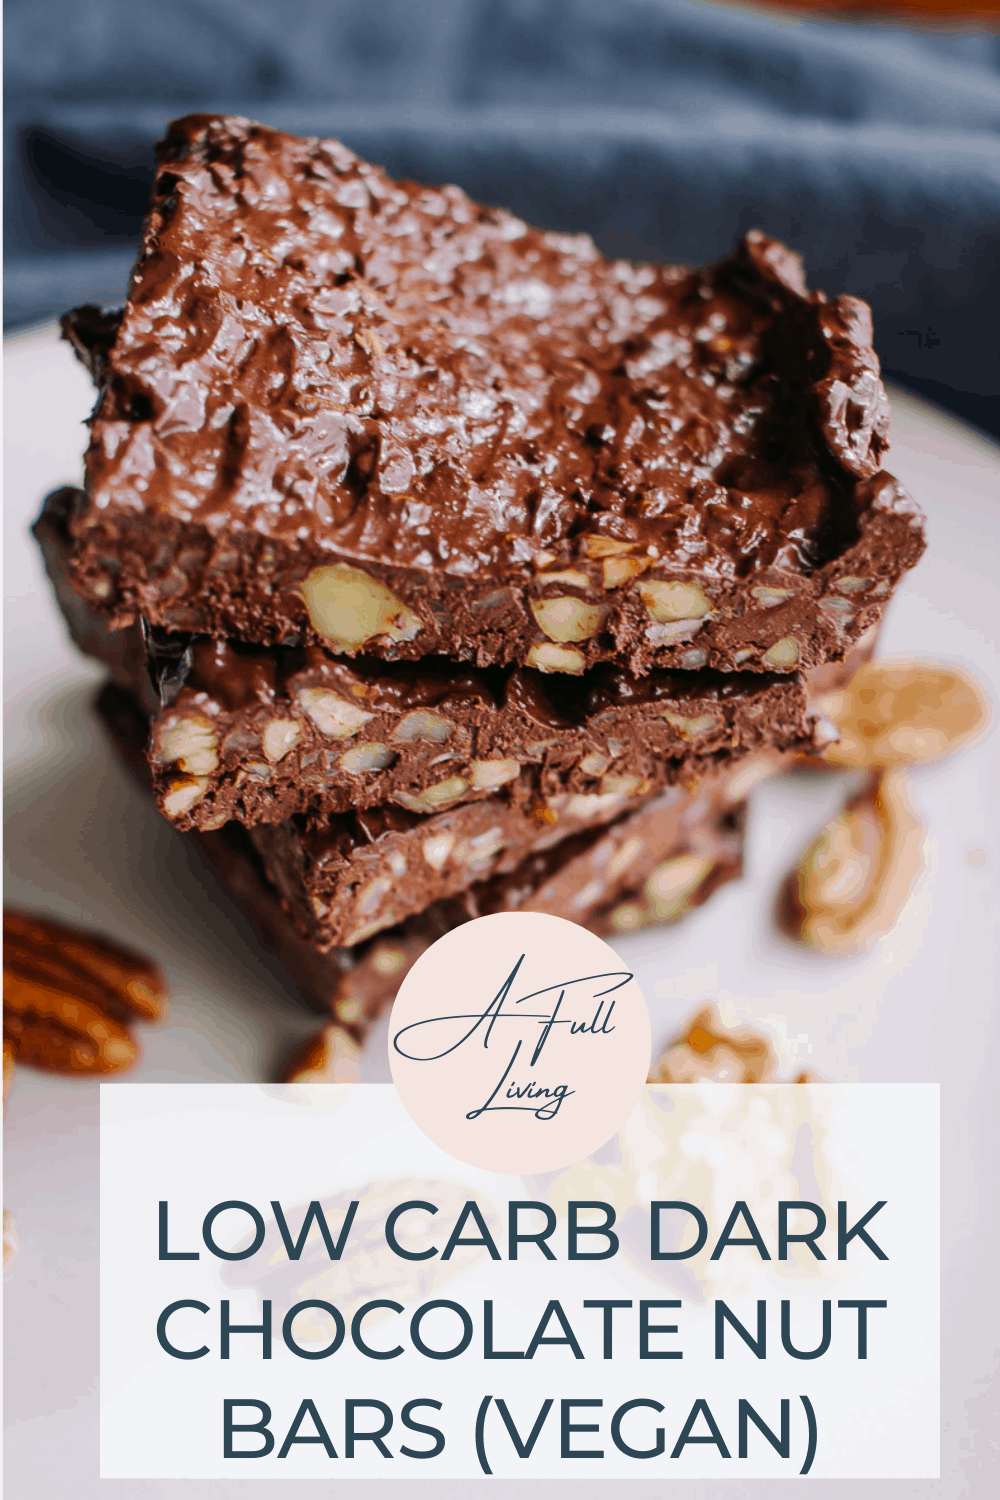 Low Carb Dark Chocolate Nut Bars - A Full Living